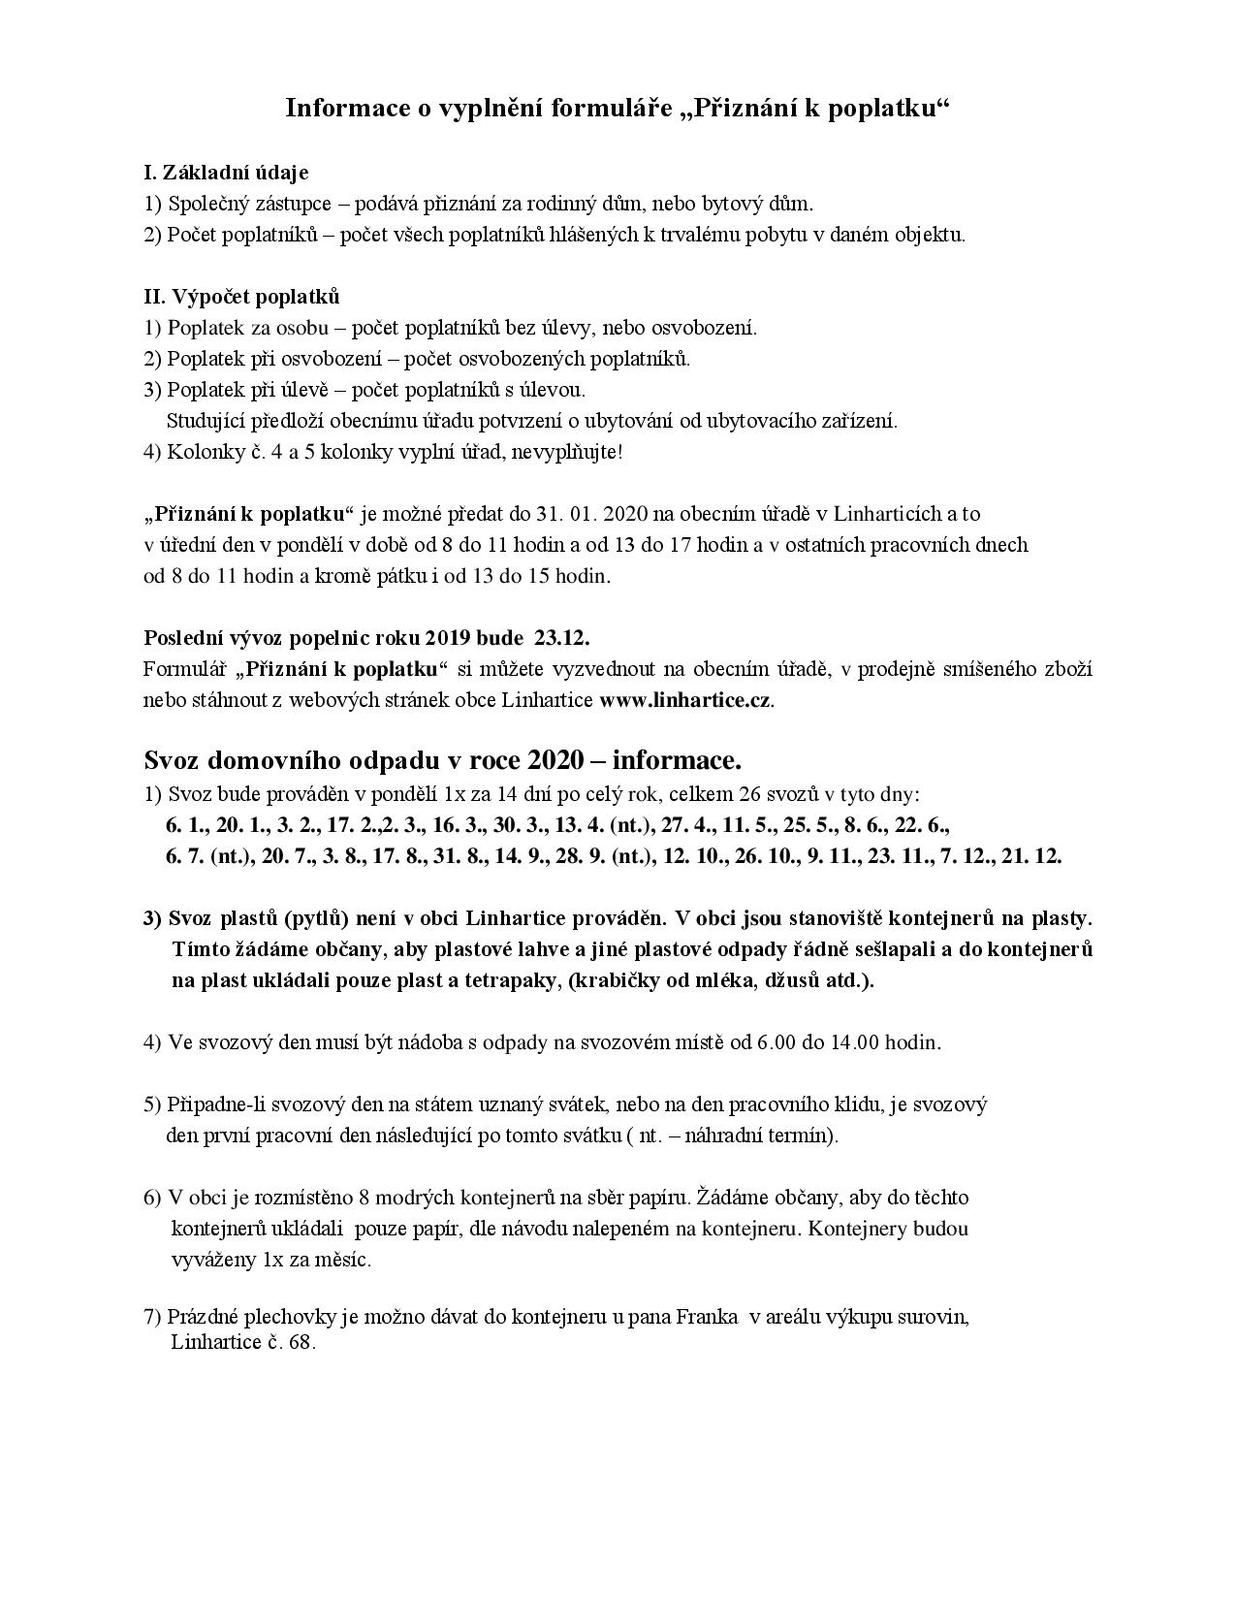 Document-page-001 (1).jpg